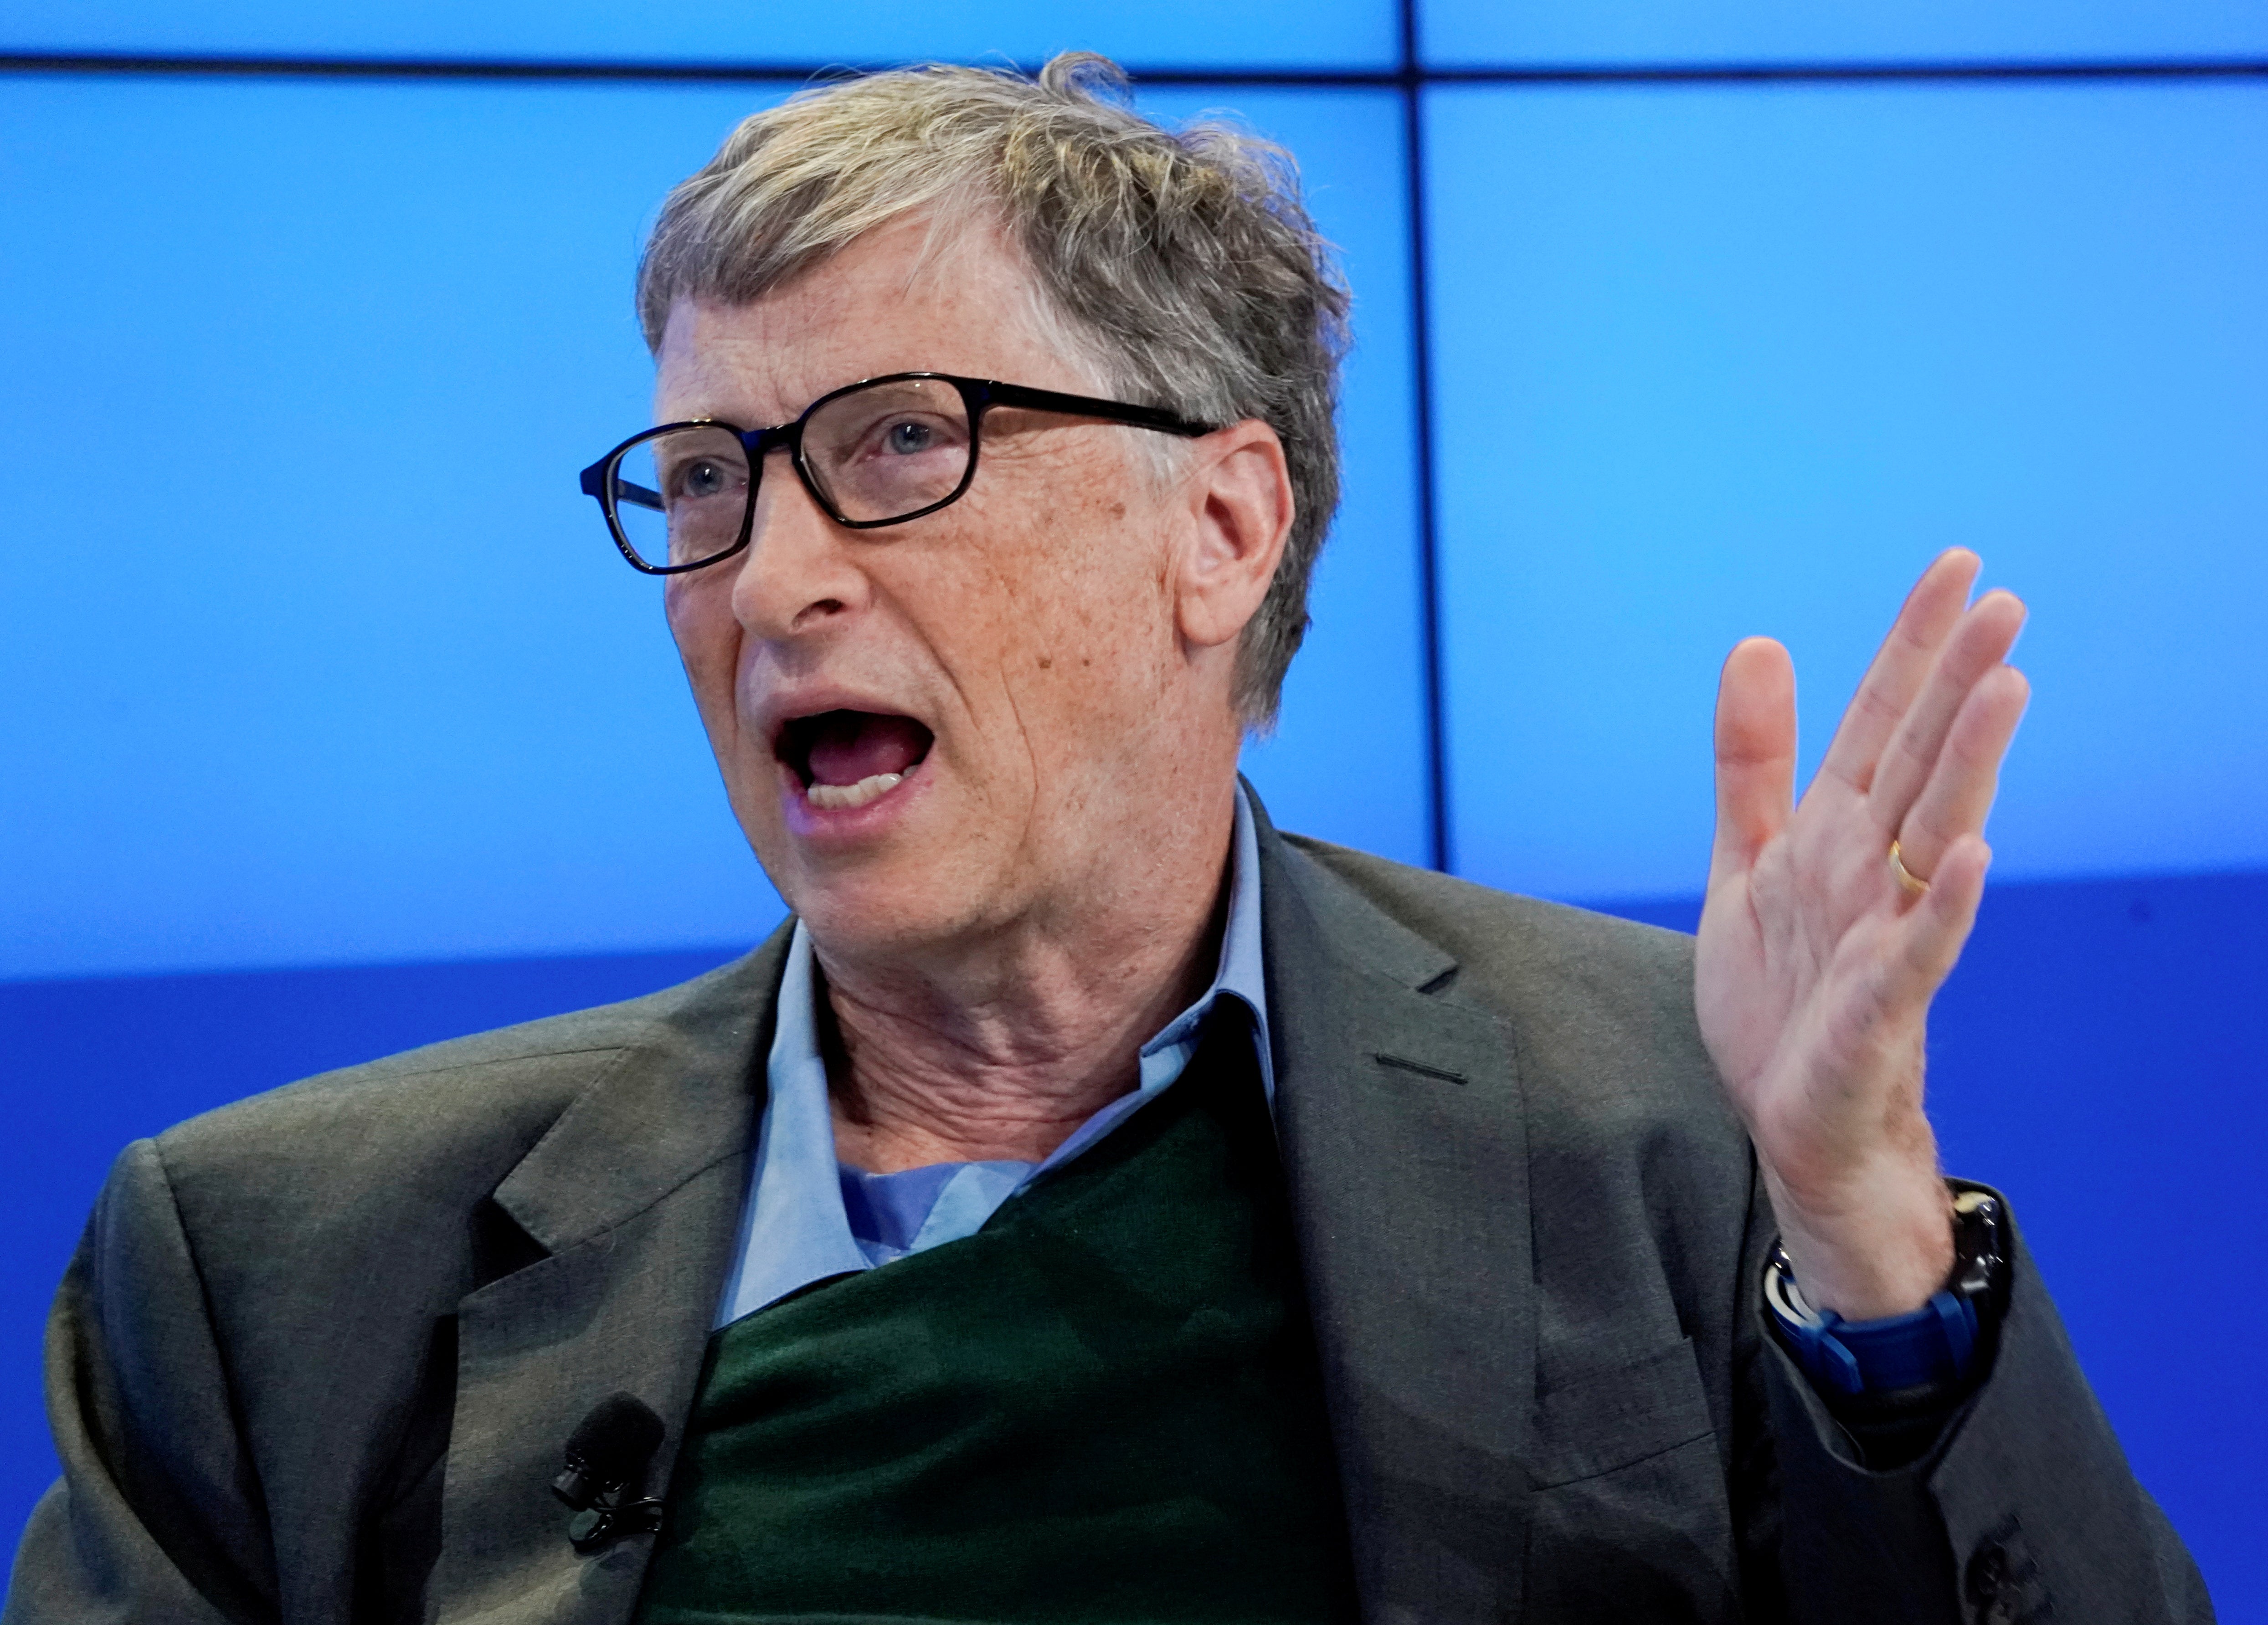 Microsoft co-founder Bill Gates said the pandemic was an “incredible tragedy"